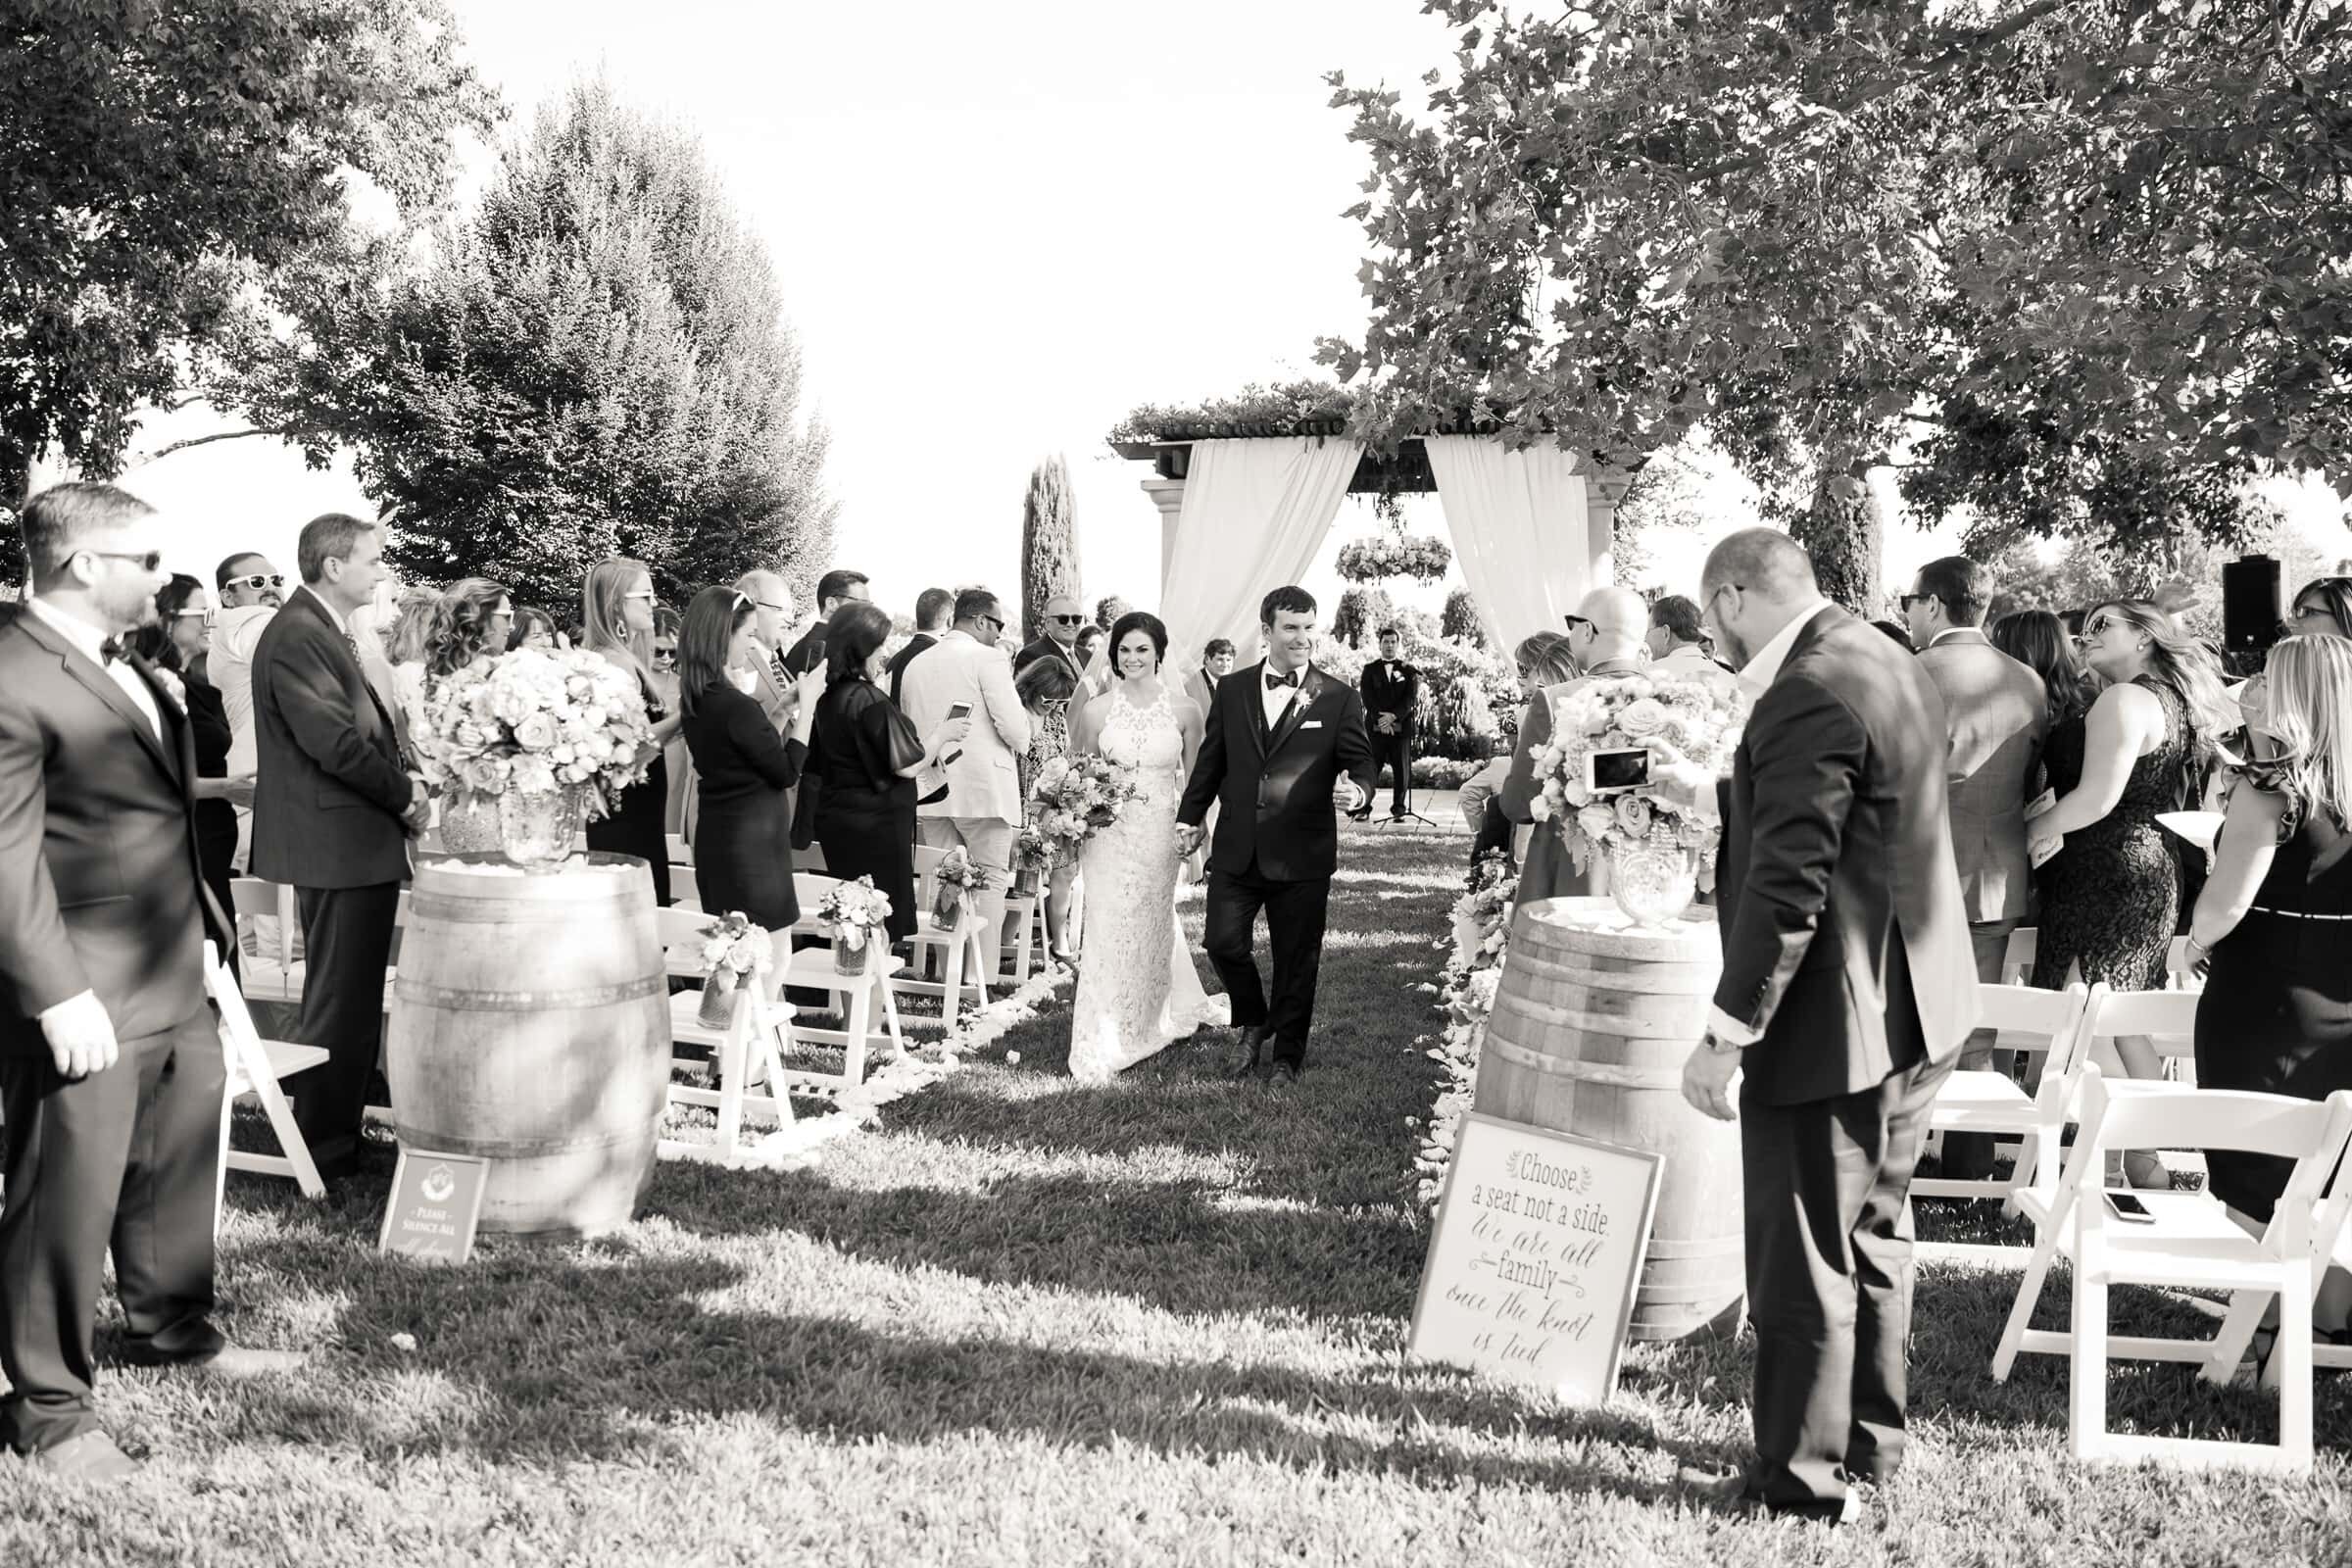 wedding recessional. newlyweds walking up the aisle after tying the knot at their outdoor wedding venue in raleigh nc,